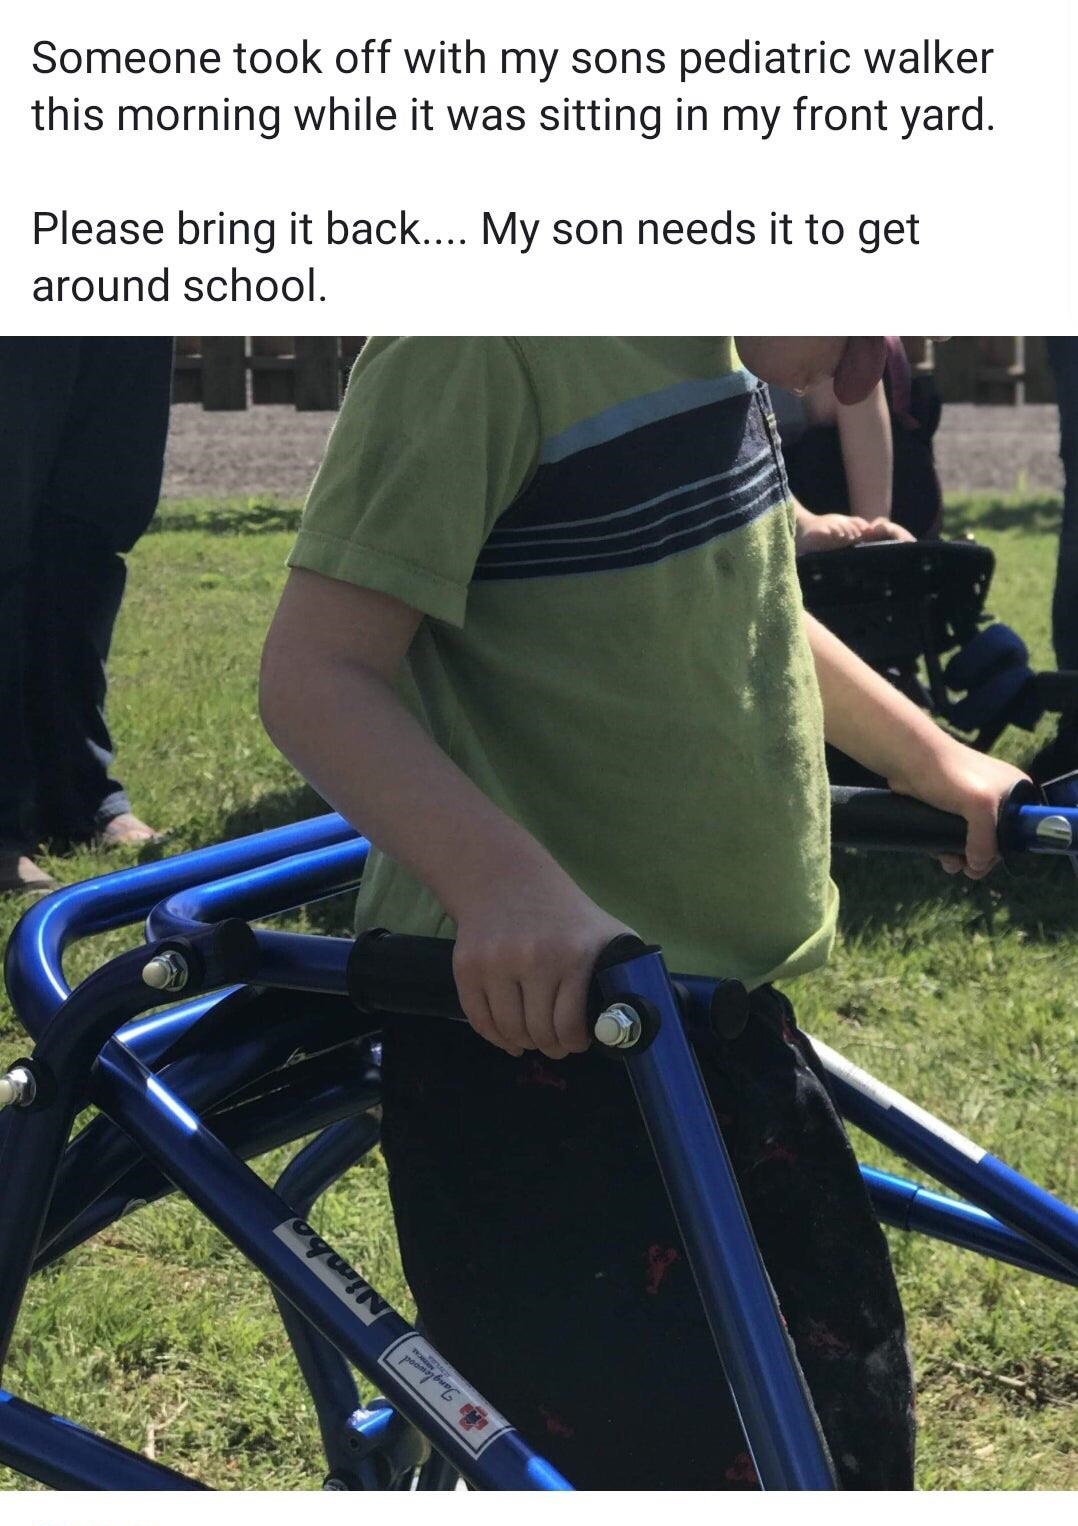 bicycle frame - Someone took off with my sons pediatric walker this morning while it was sitting in my front yard. Please bring it back.... My son needs it to get around school. porno